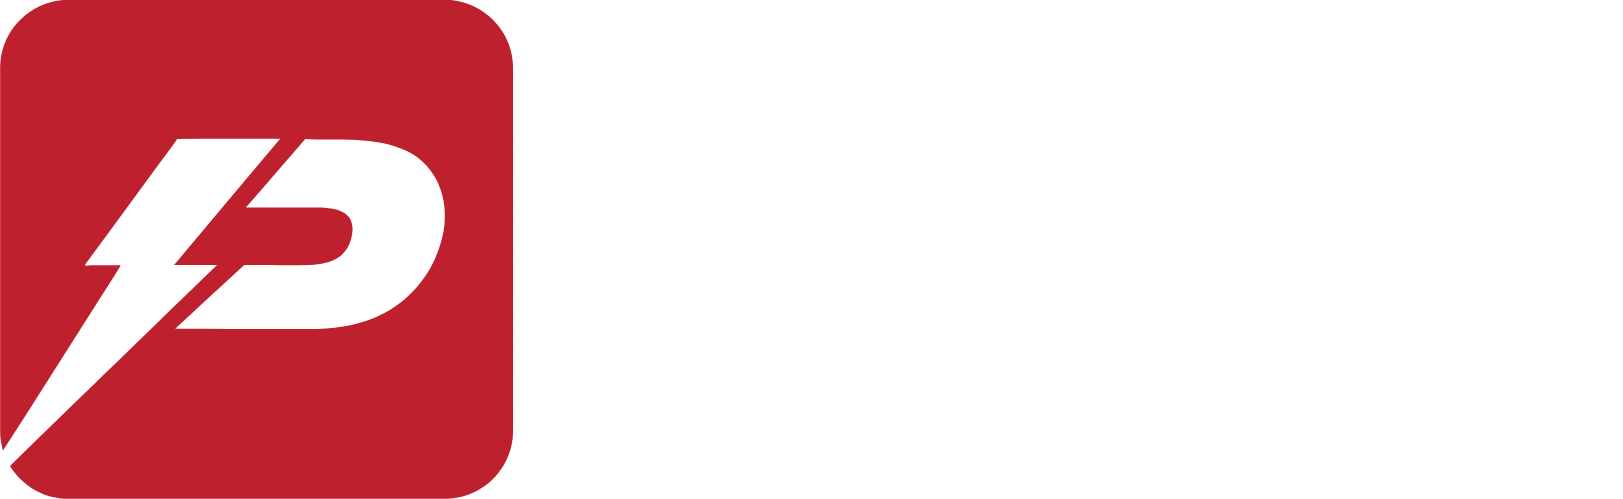 Pioneer Power Solutions logo large for dark backgrounds (transparent PNG)